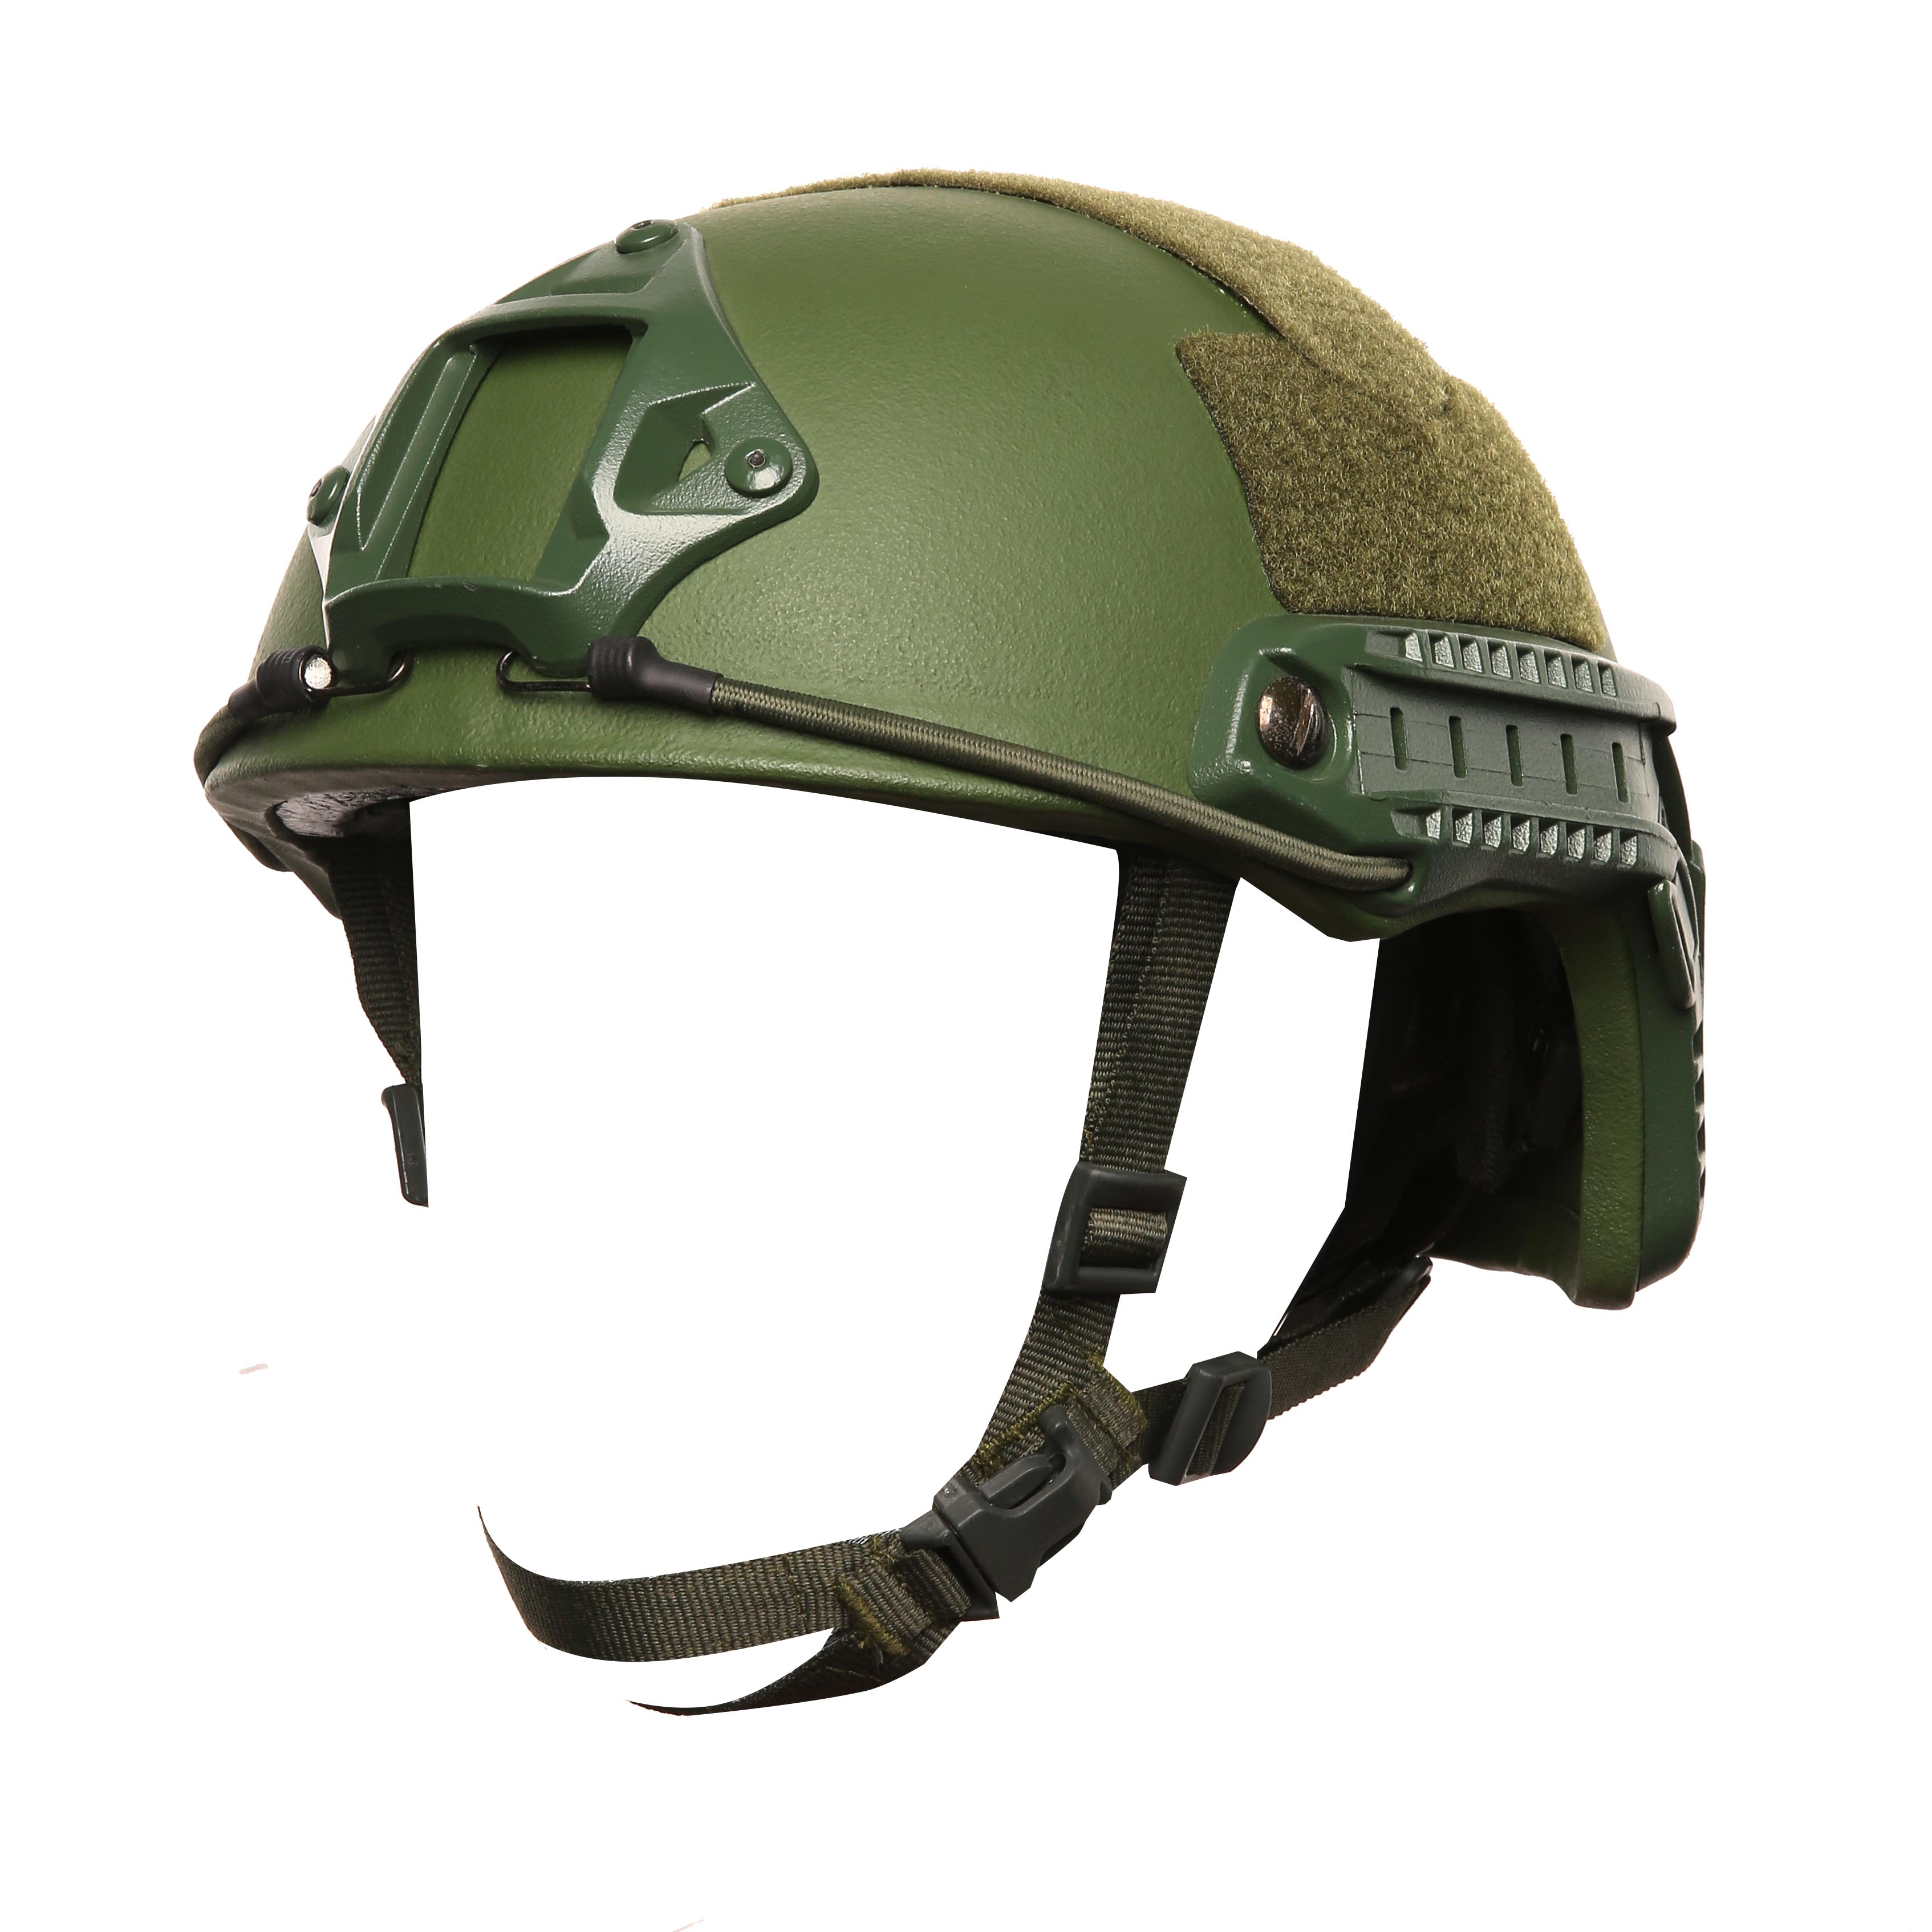 Primary Combat for Army/Law Enforcement Helmet